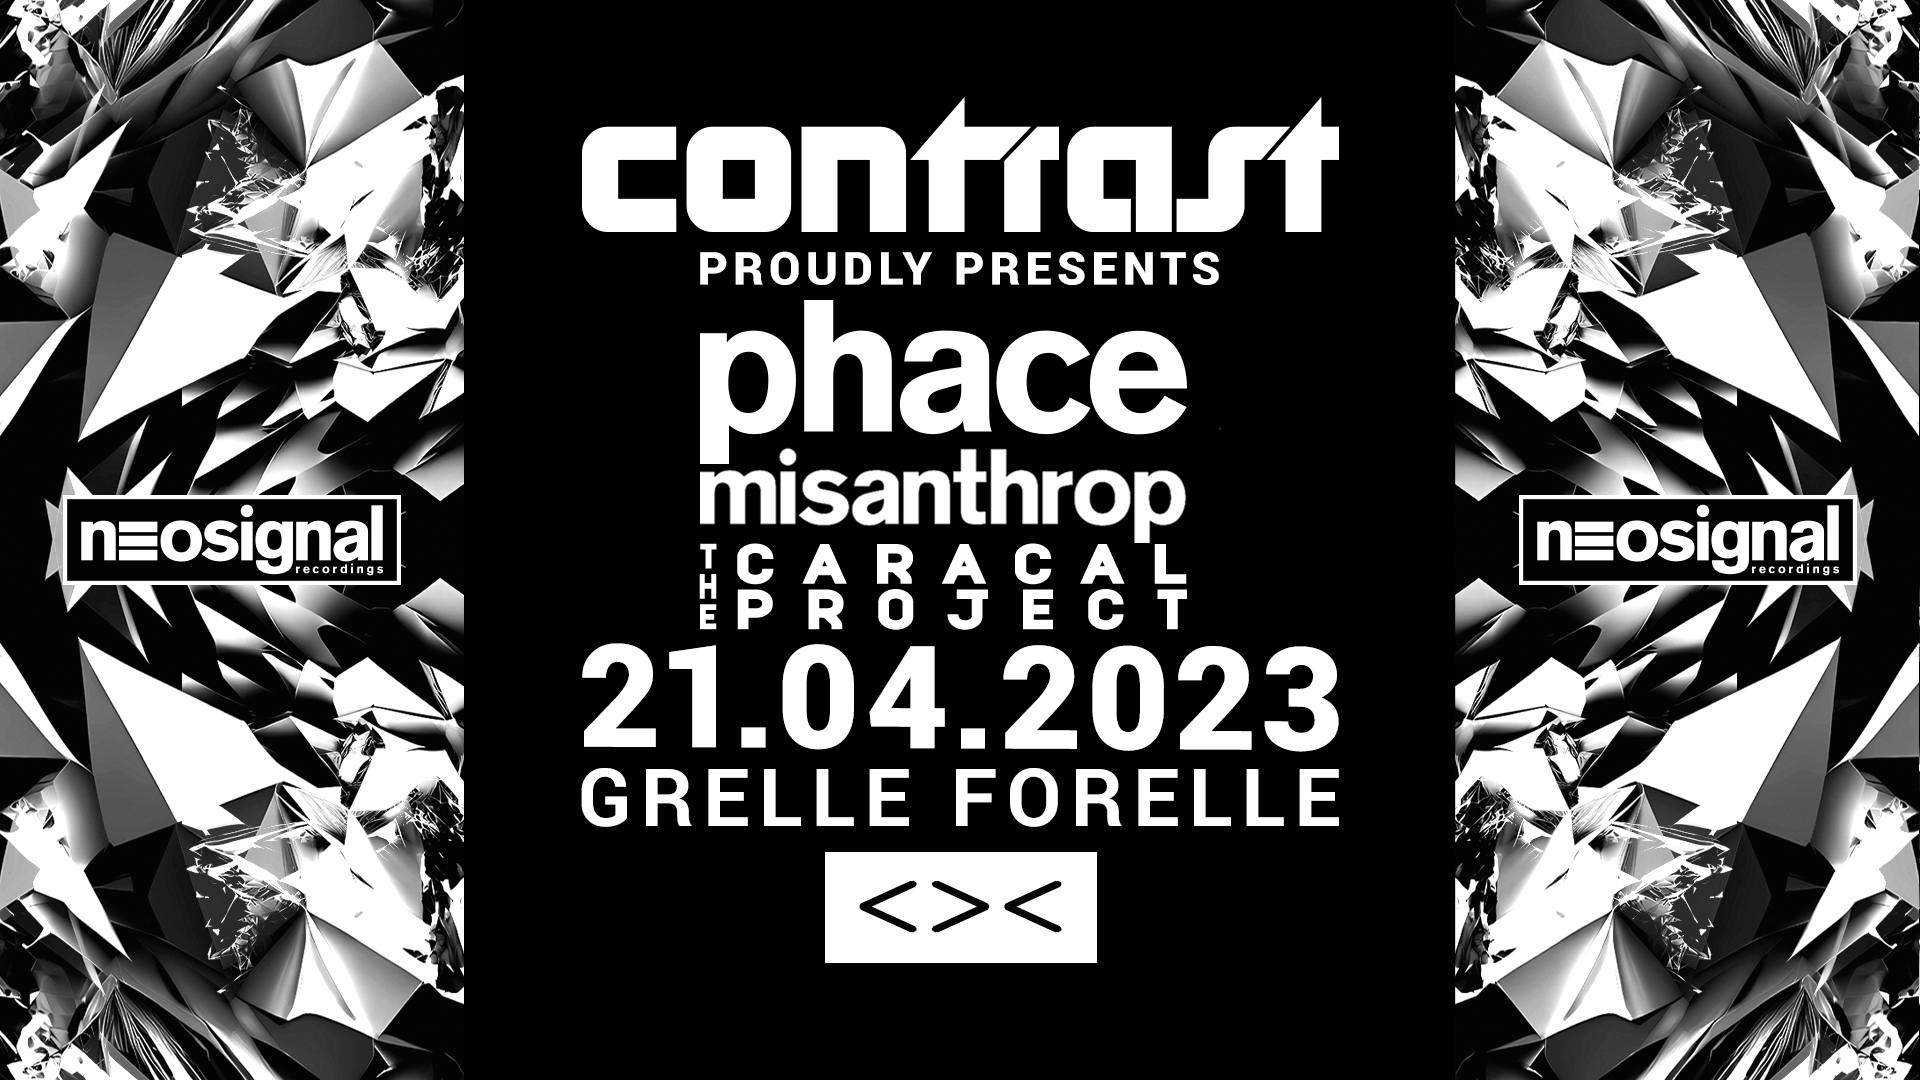 CONTRAST pres. NEOSIGNAL with Phace + Misanthrop + THE CARACAL PROJECT - 18 - Página frontal